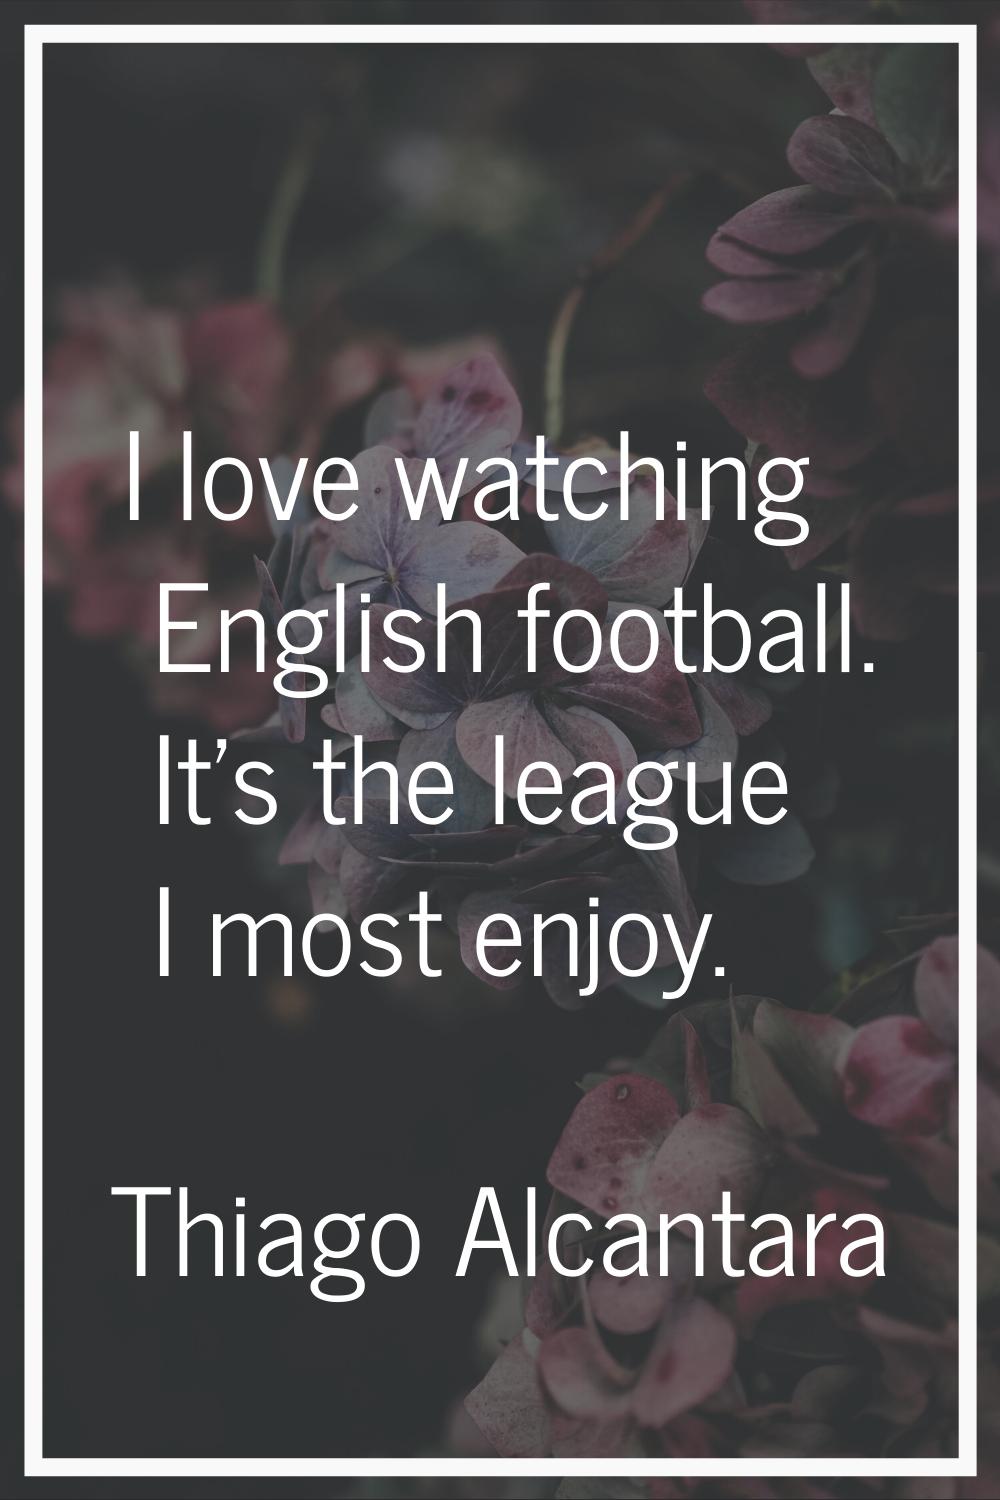 I love watching English football. It's the league I most enjoy.